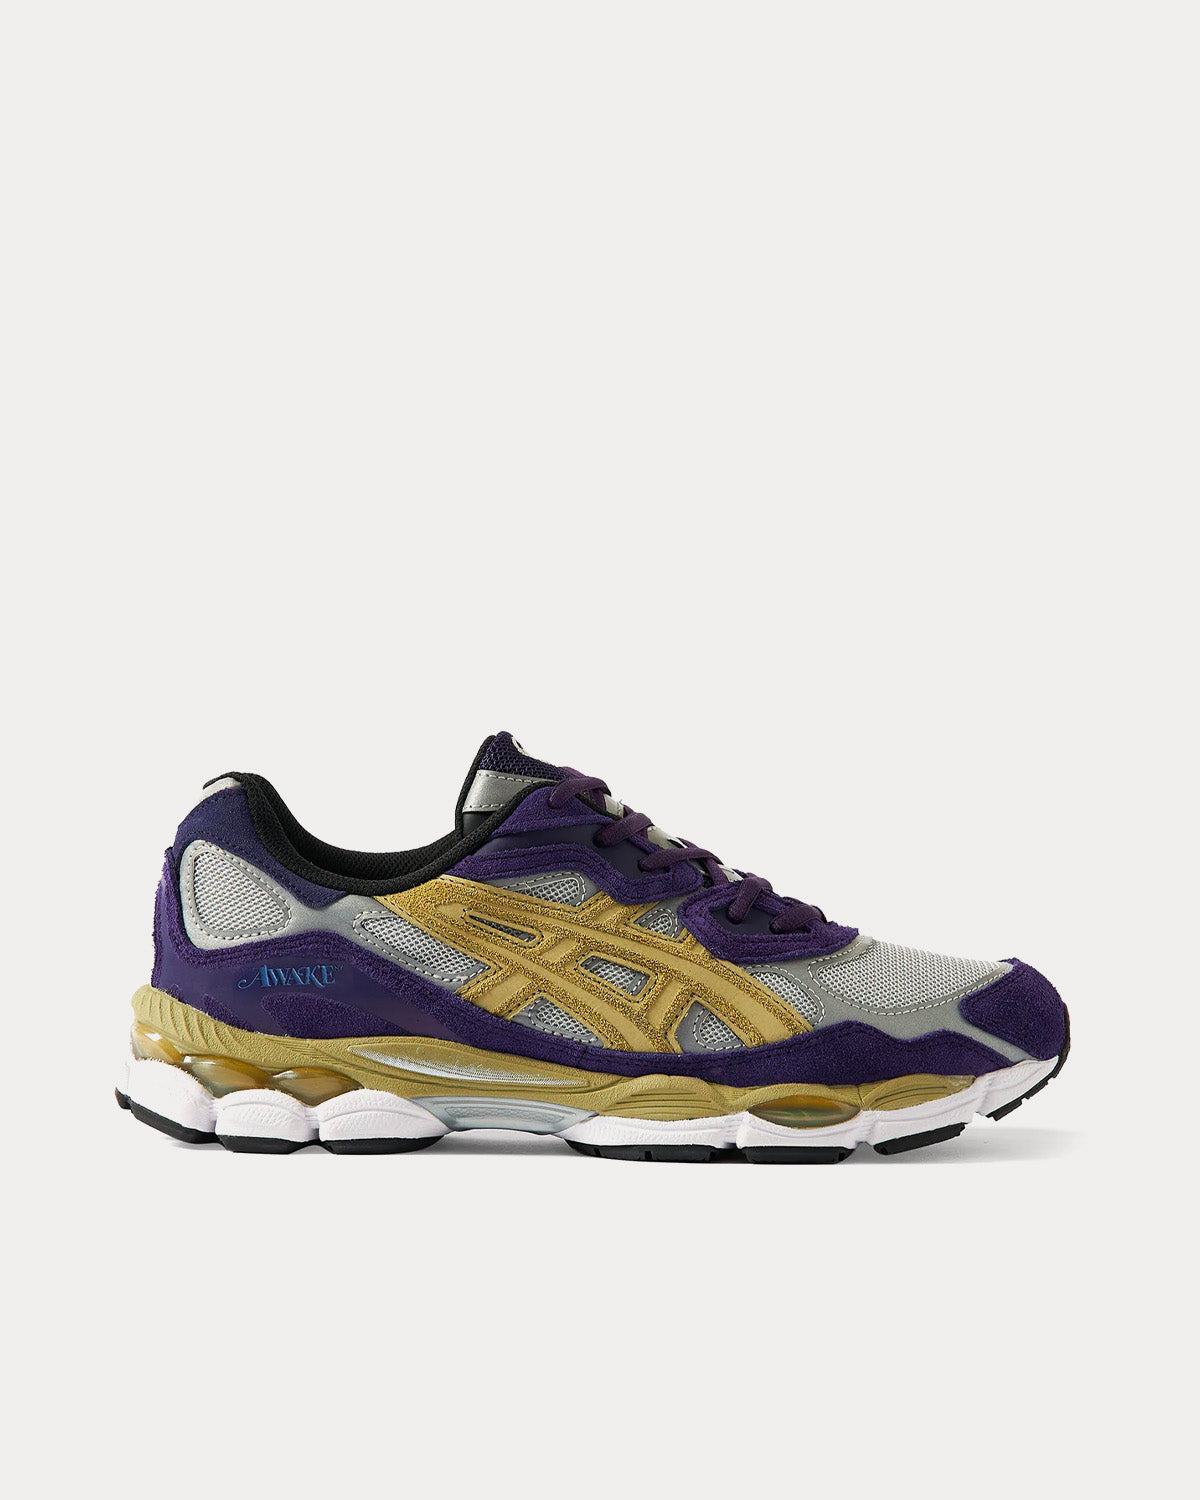 Asics x Awake NY - GEL-NYC Pure Silver / Gothic Grape Low Top Sneakers